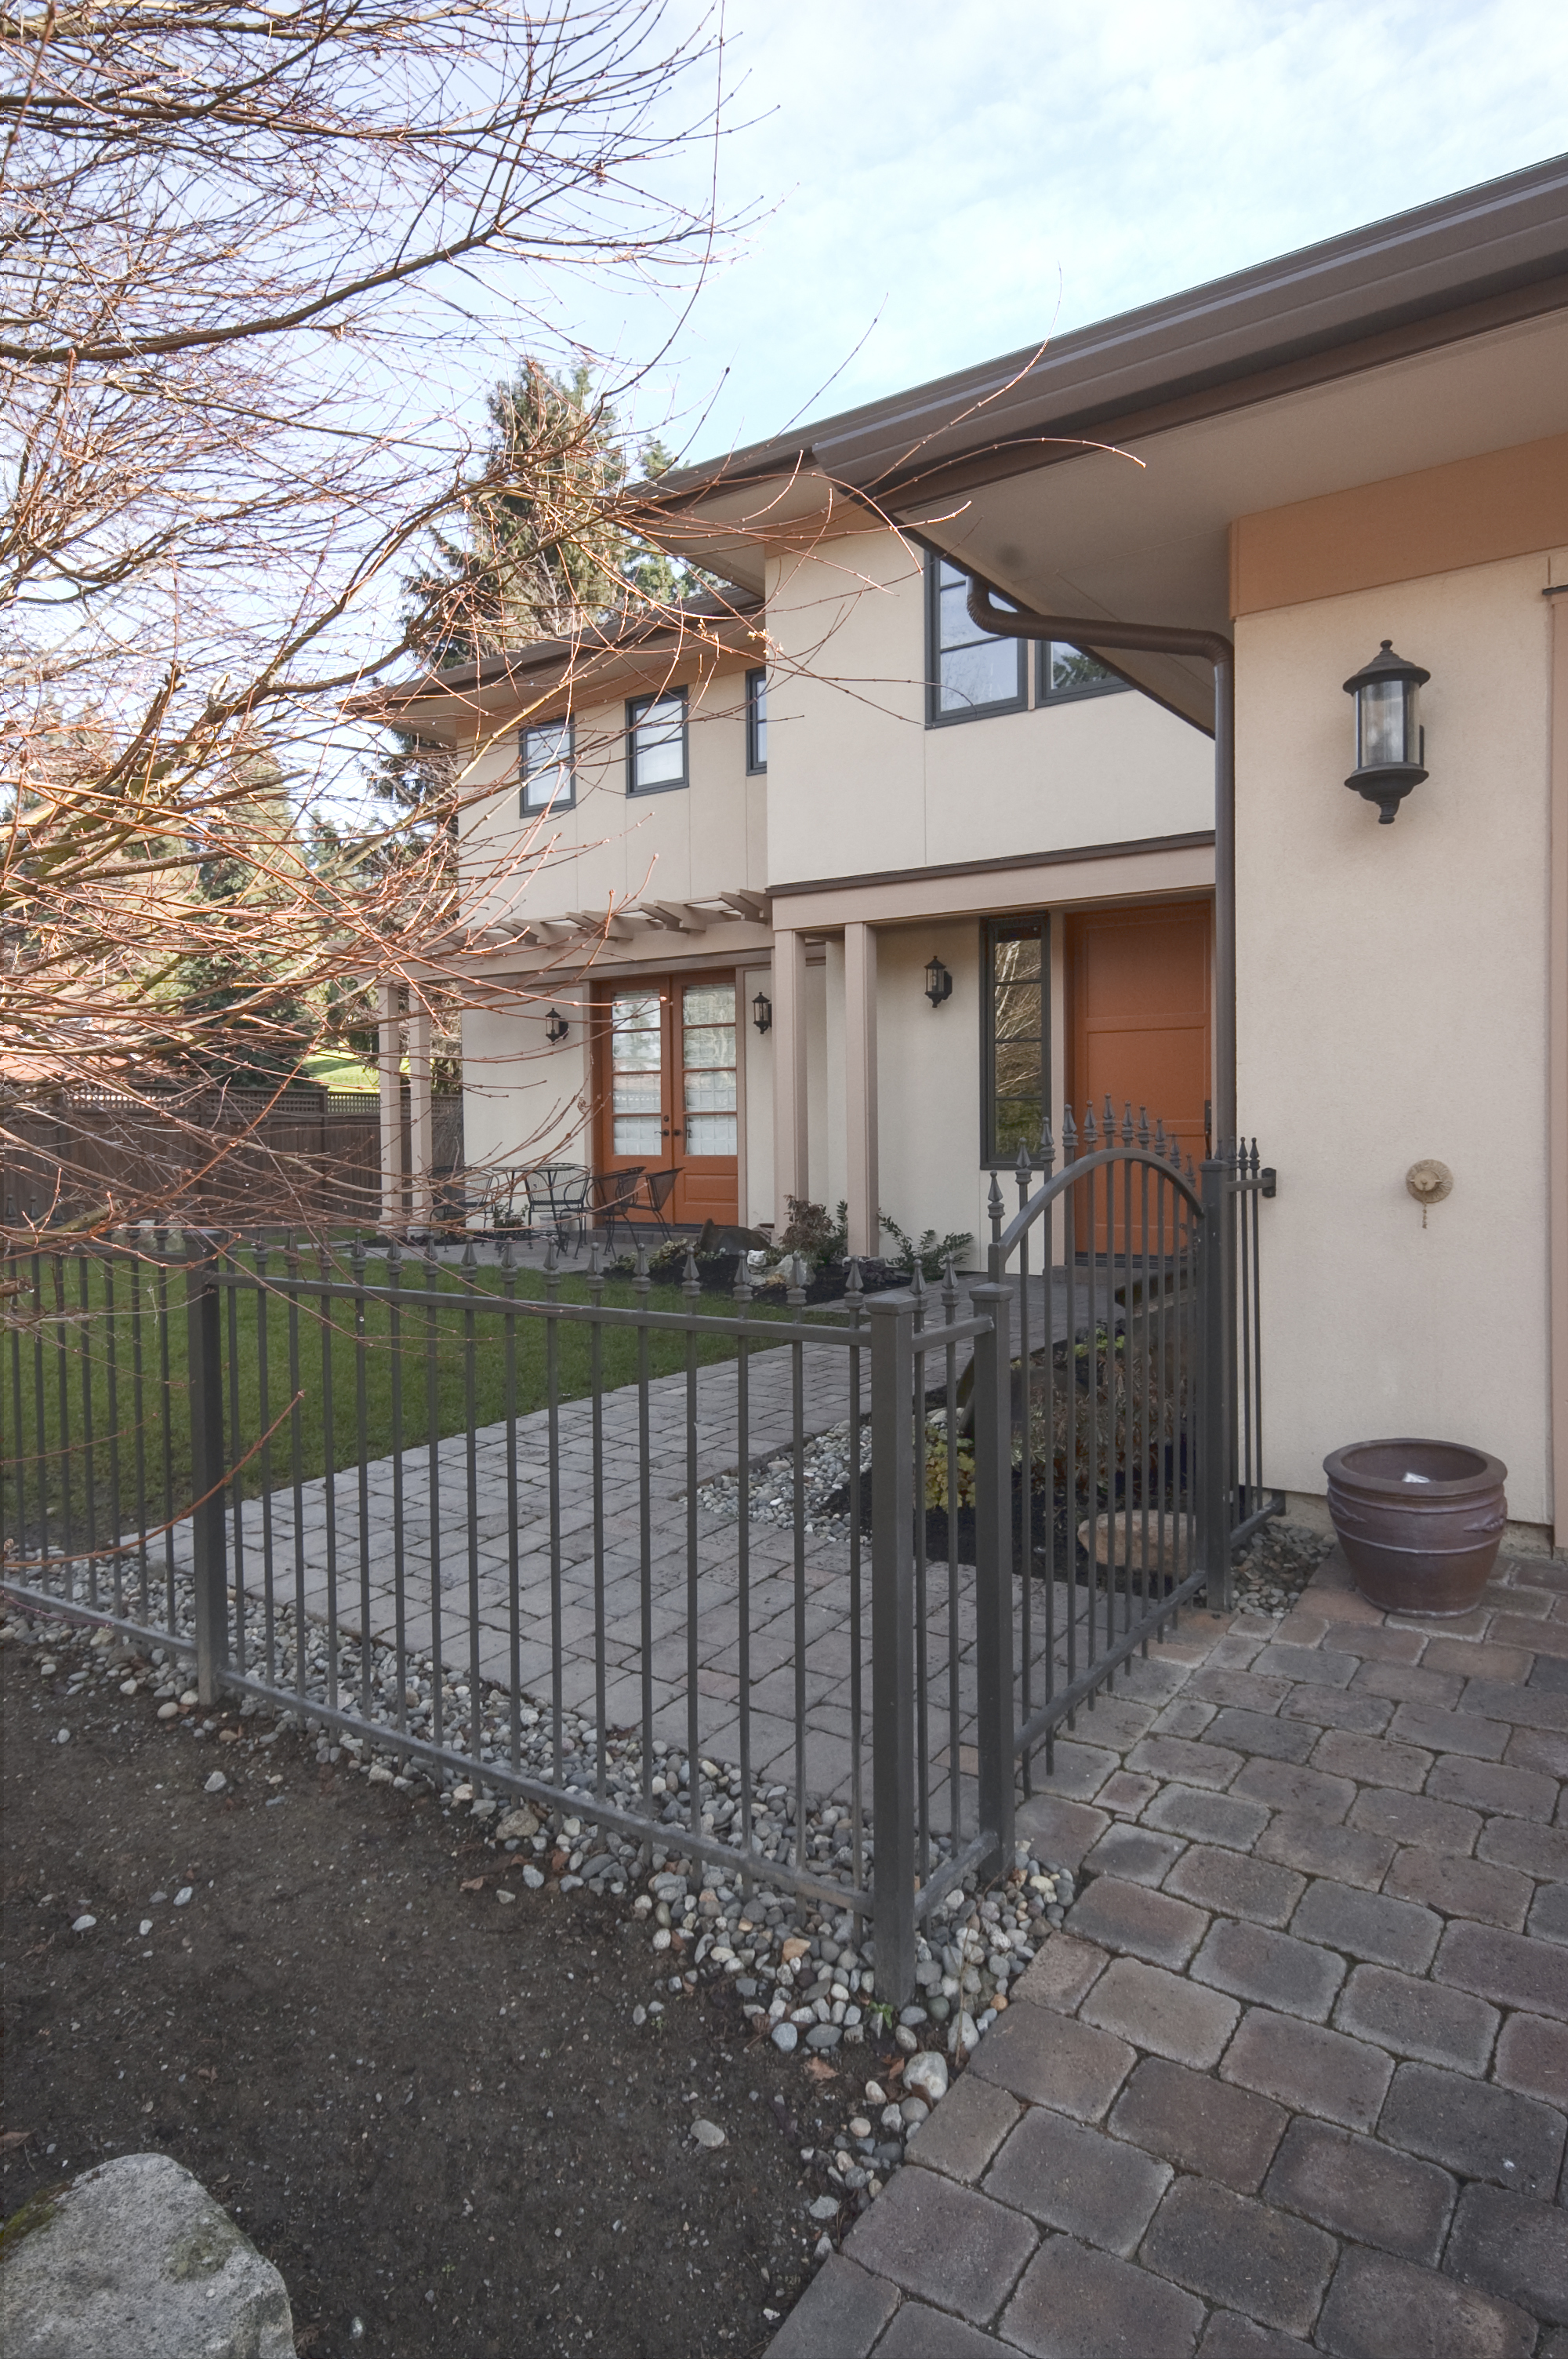 Original custom iron fence was modified and added onto to fit the new yard configuration.